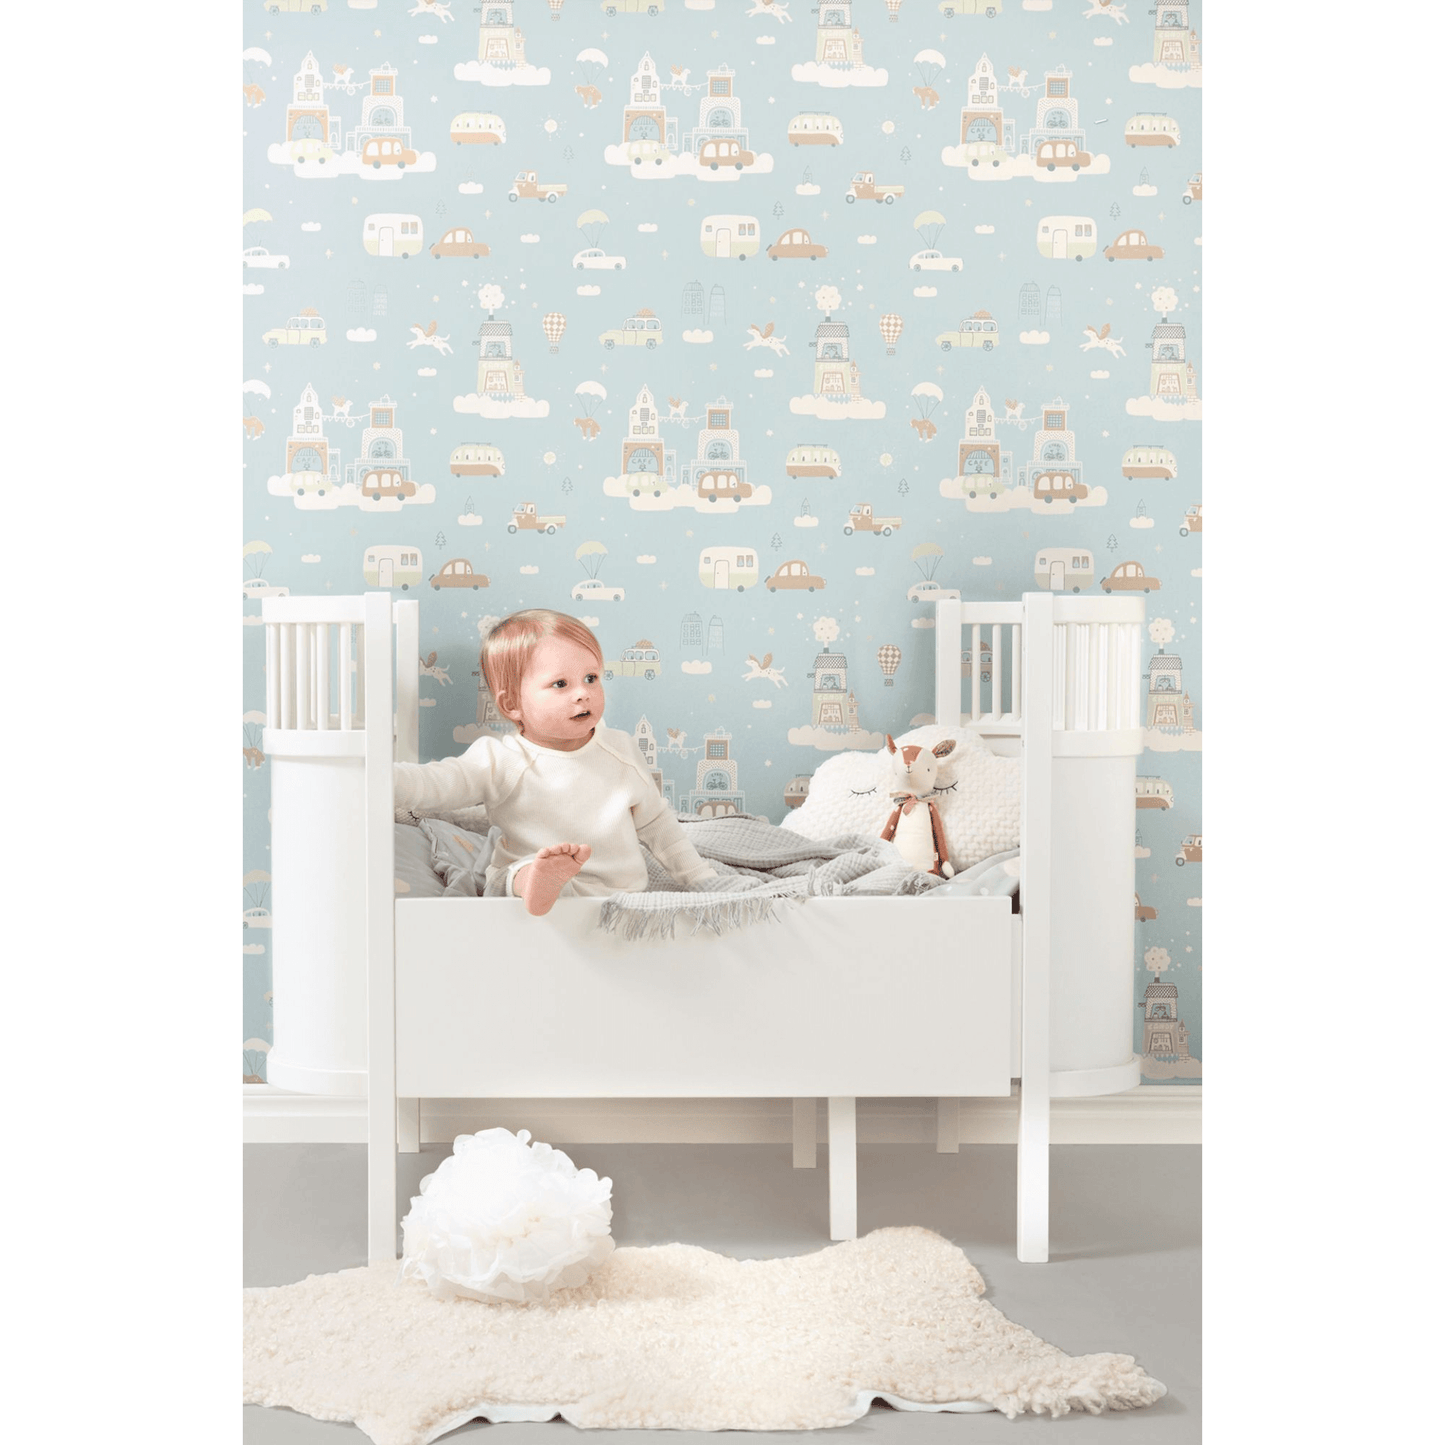 Majvillan Above the Clouds Wallpaper 131-02 child sitting on bed